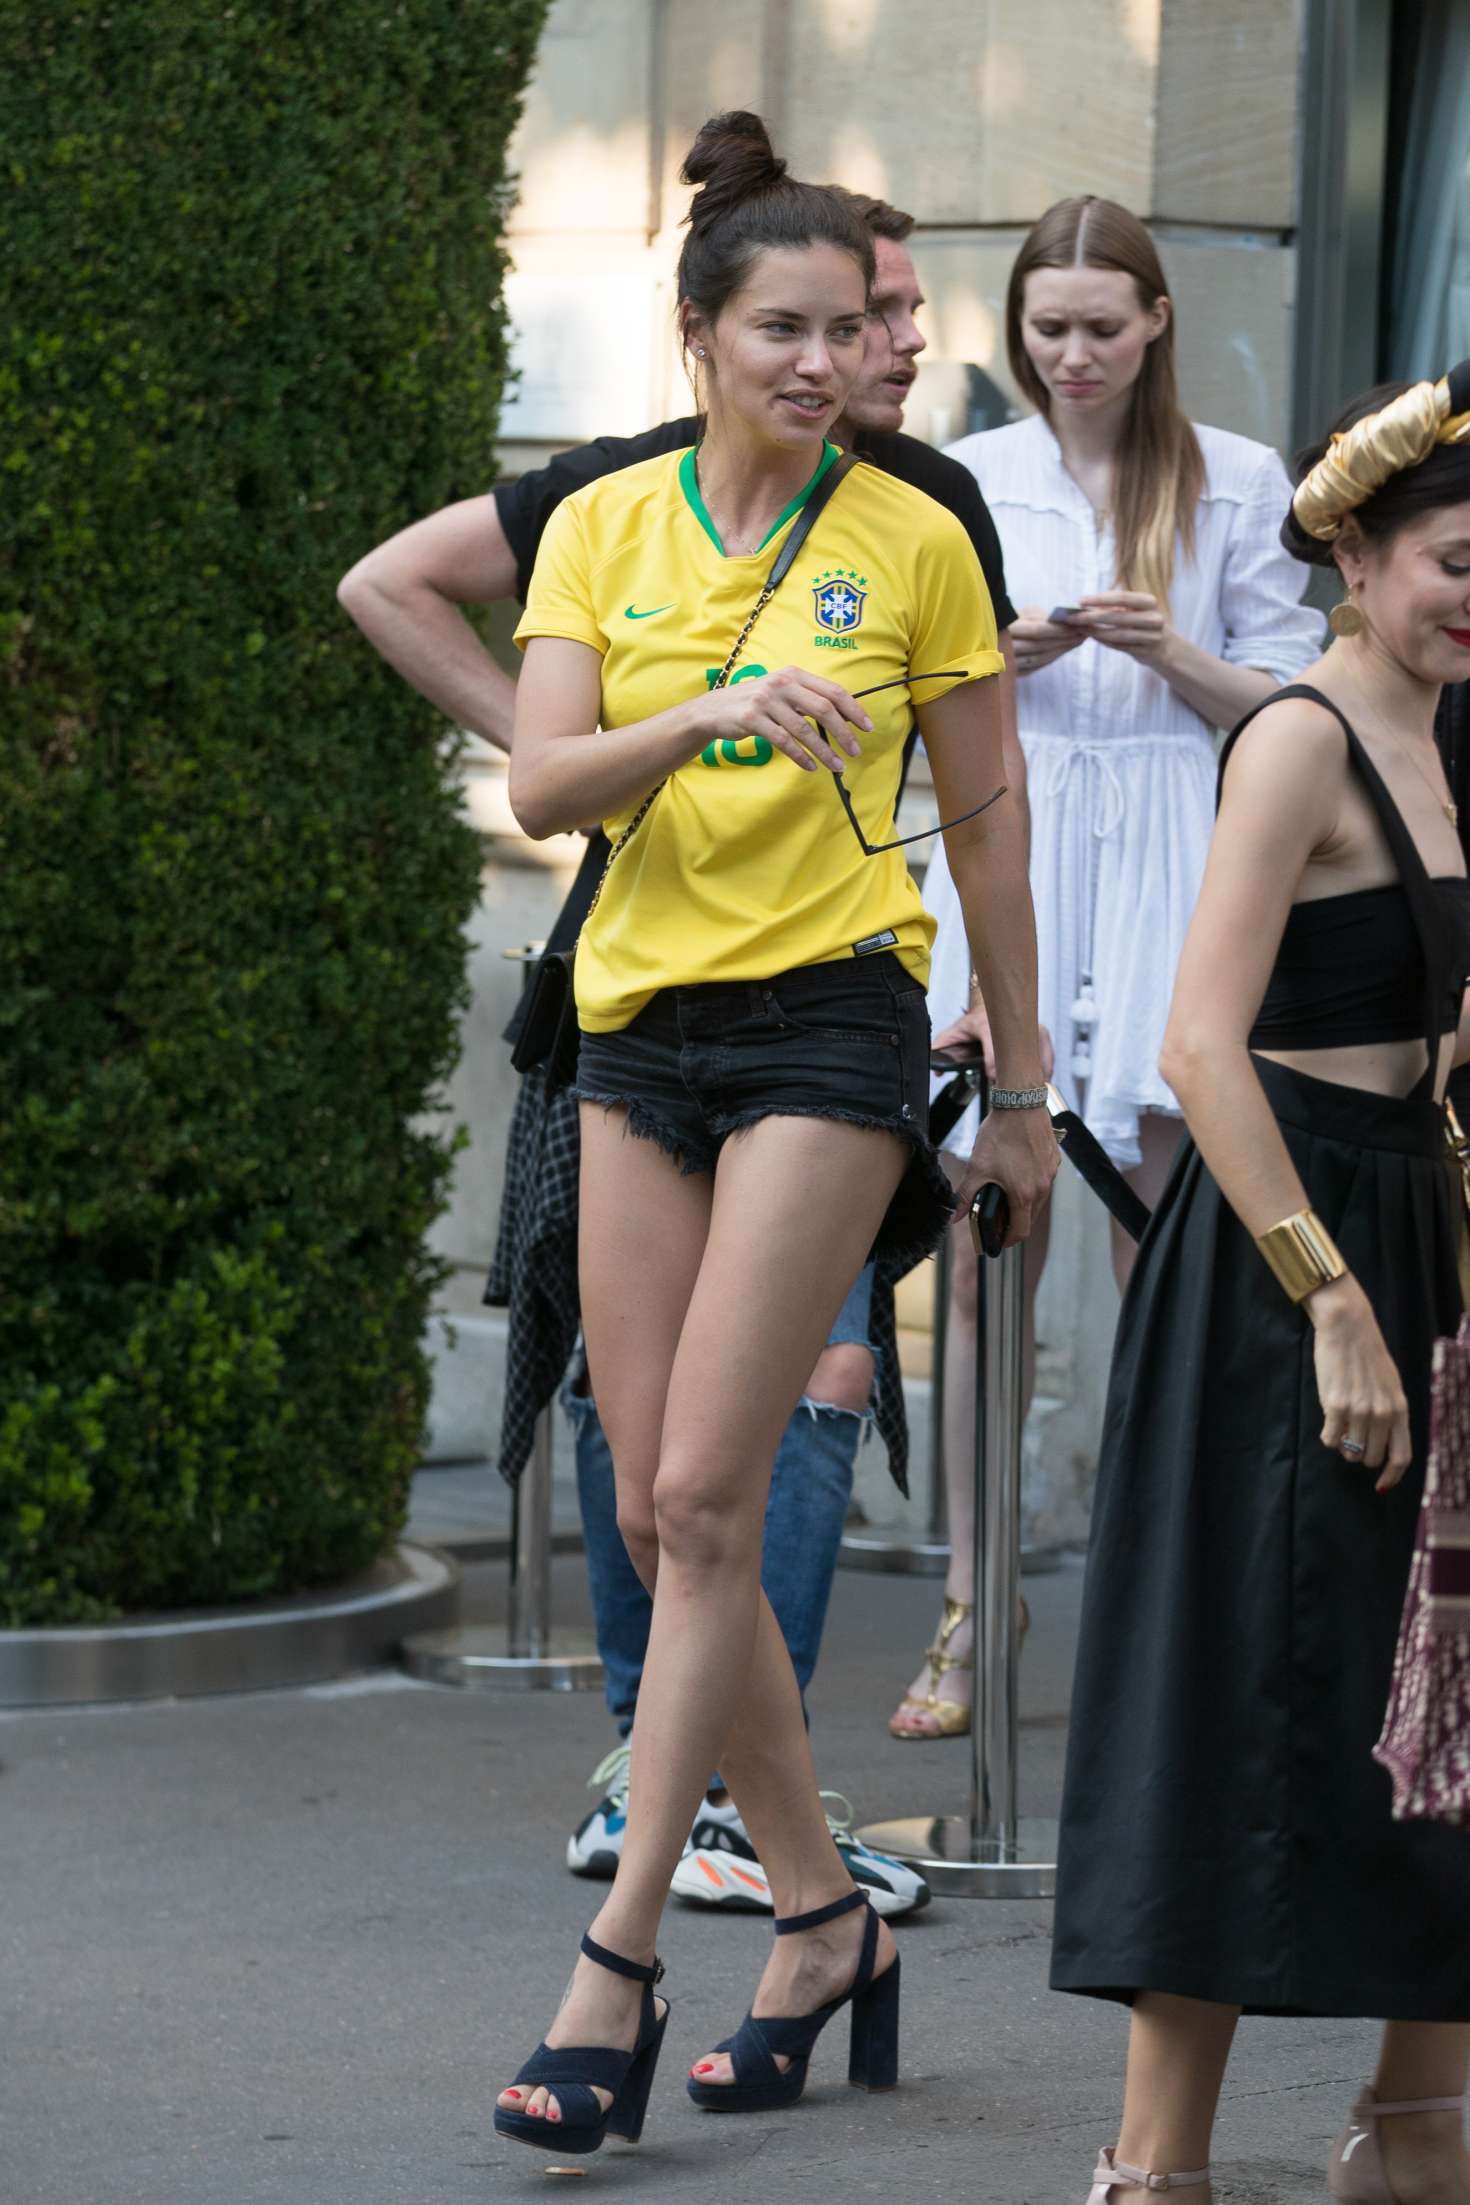 Adriana Lima in Brazil team jersey out in Paris